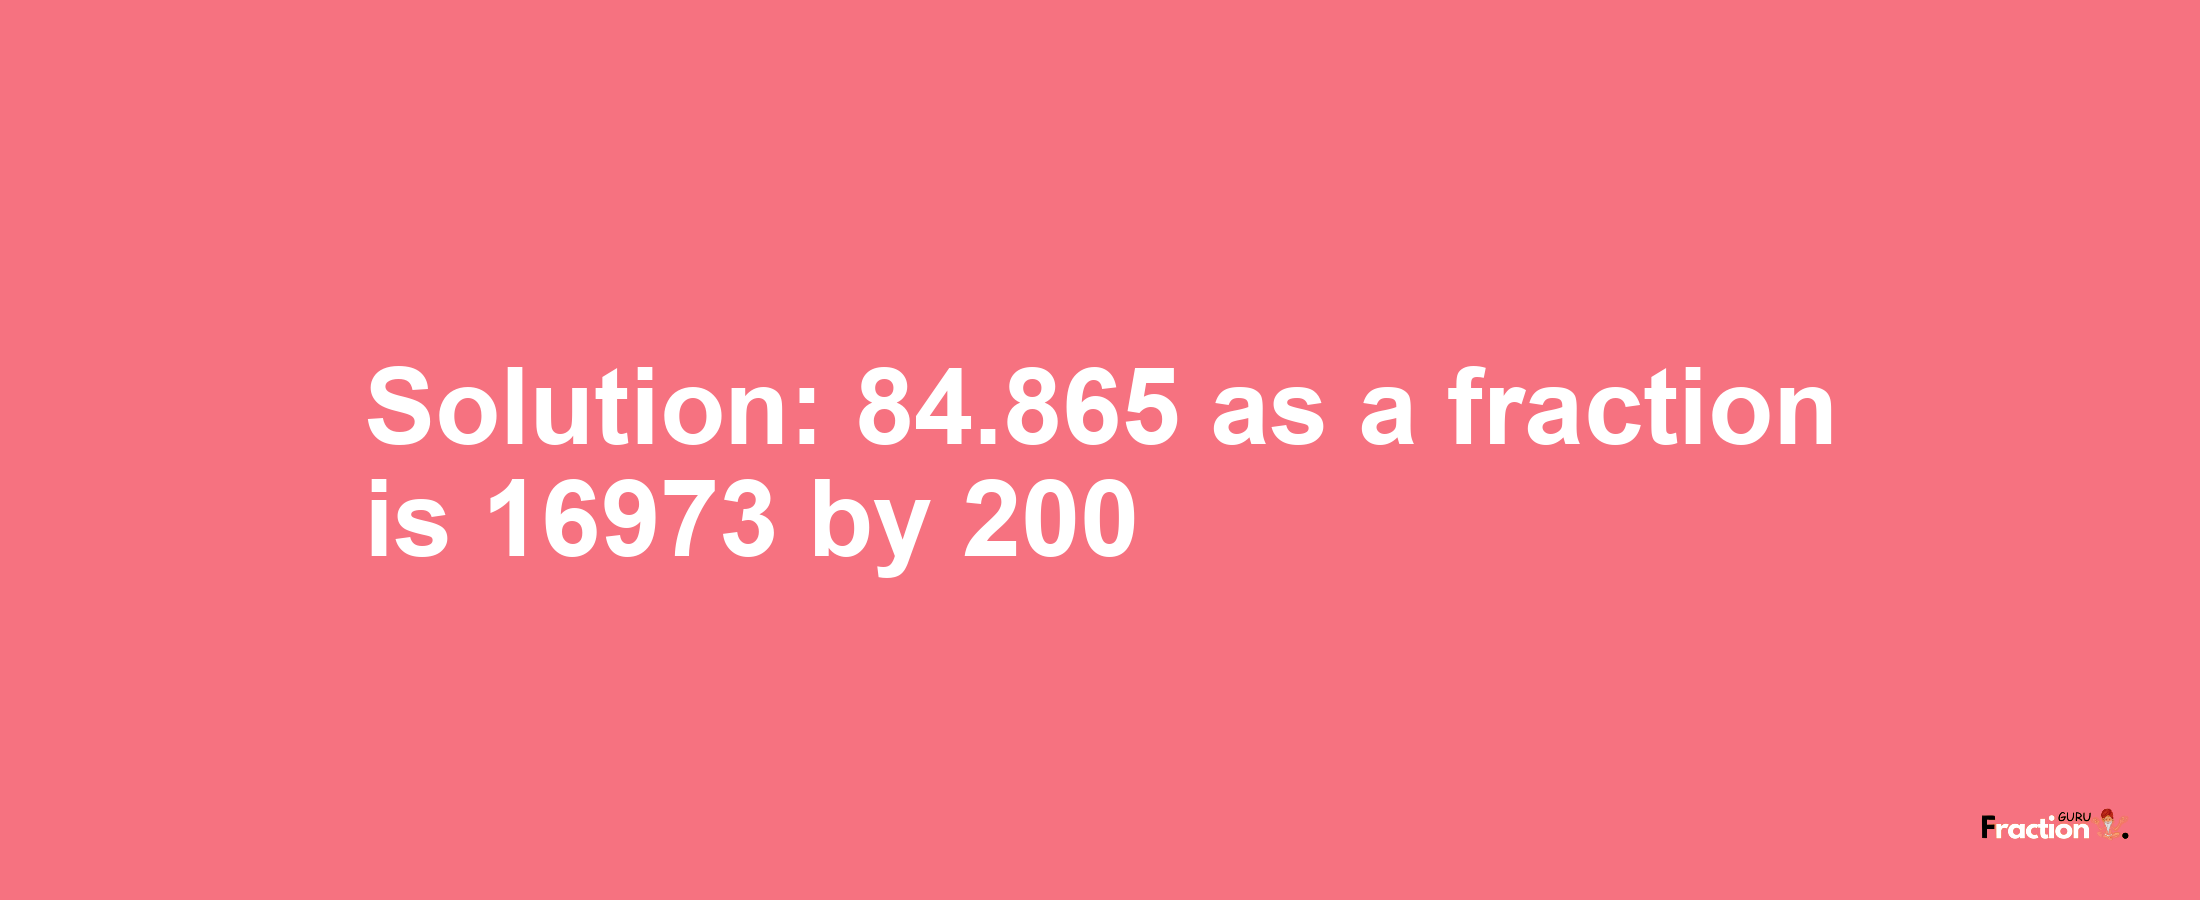 Solution:84.865 as a fraction is 16973/200